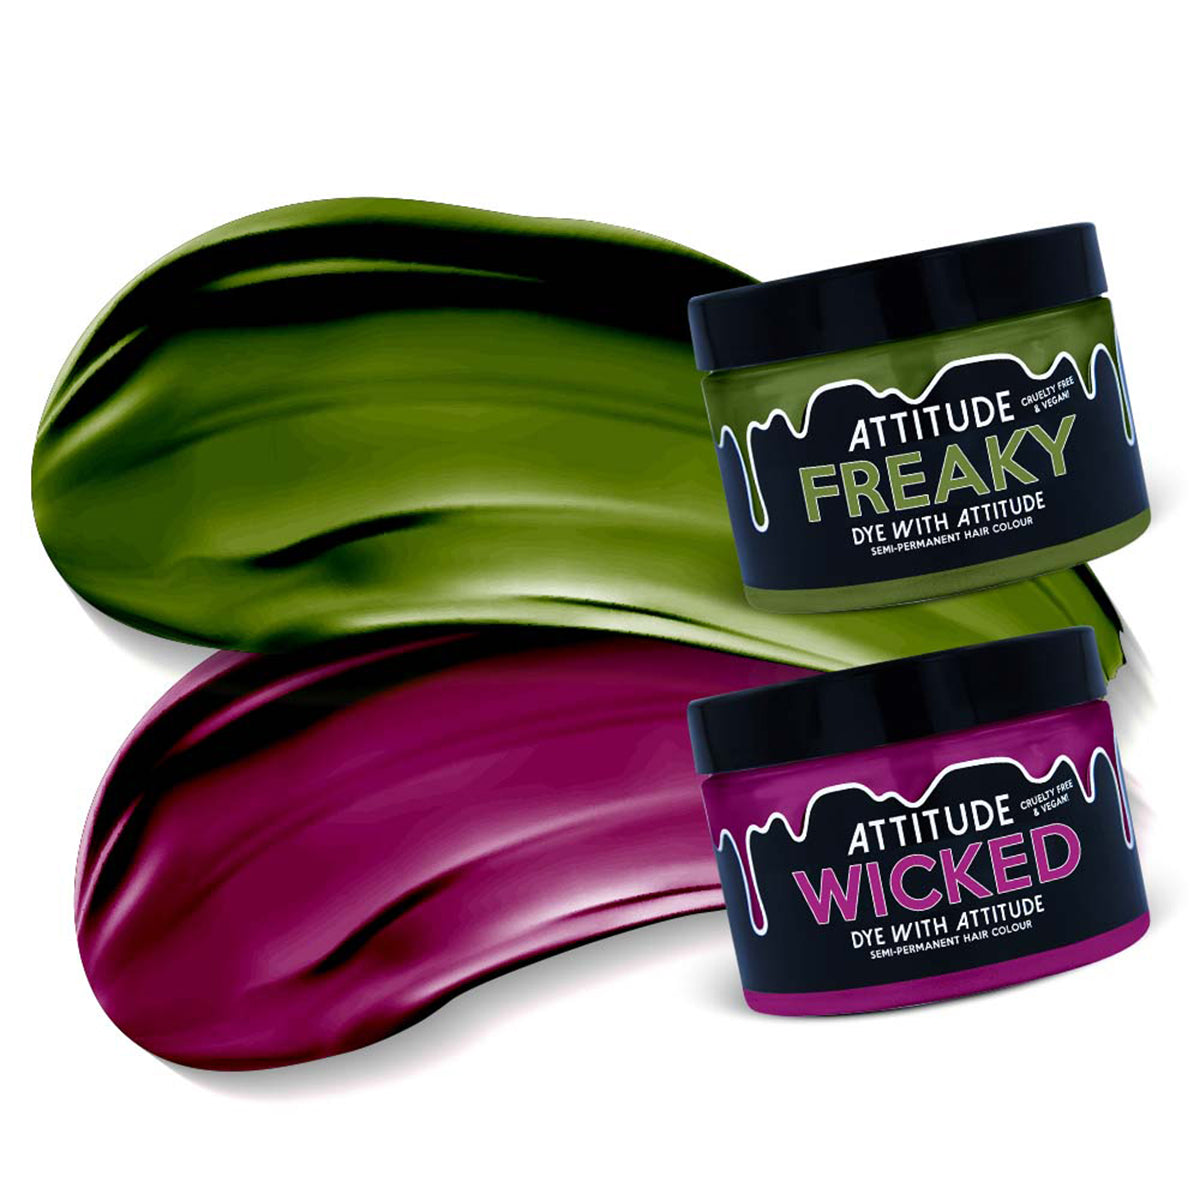 WICKED WITCH DUO - Attitude Hair Dye - Duo